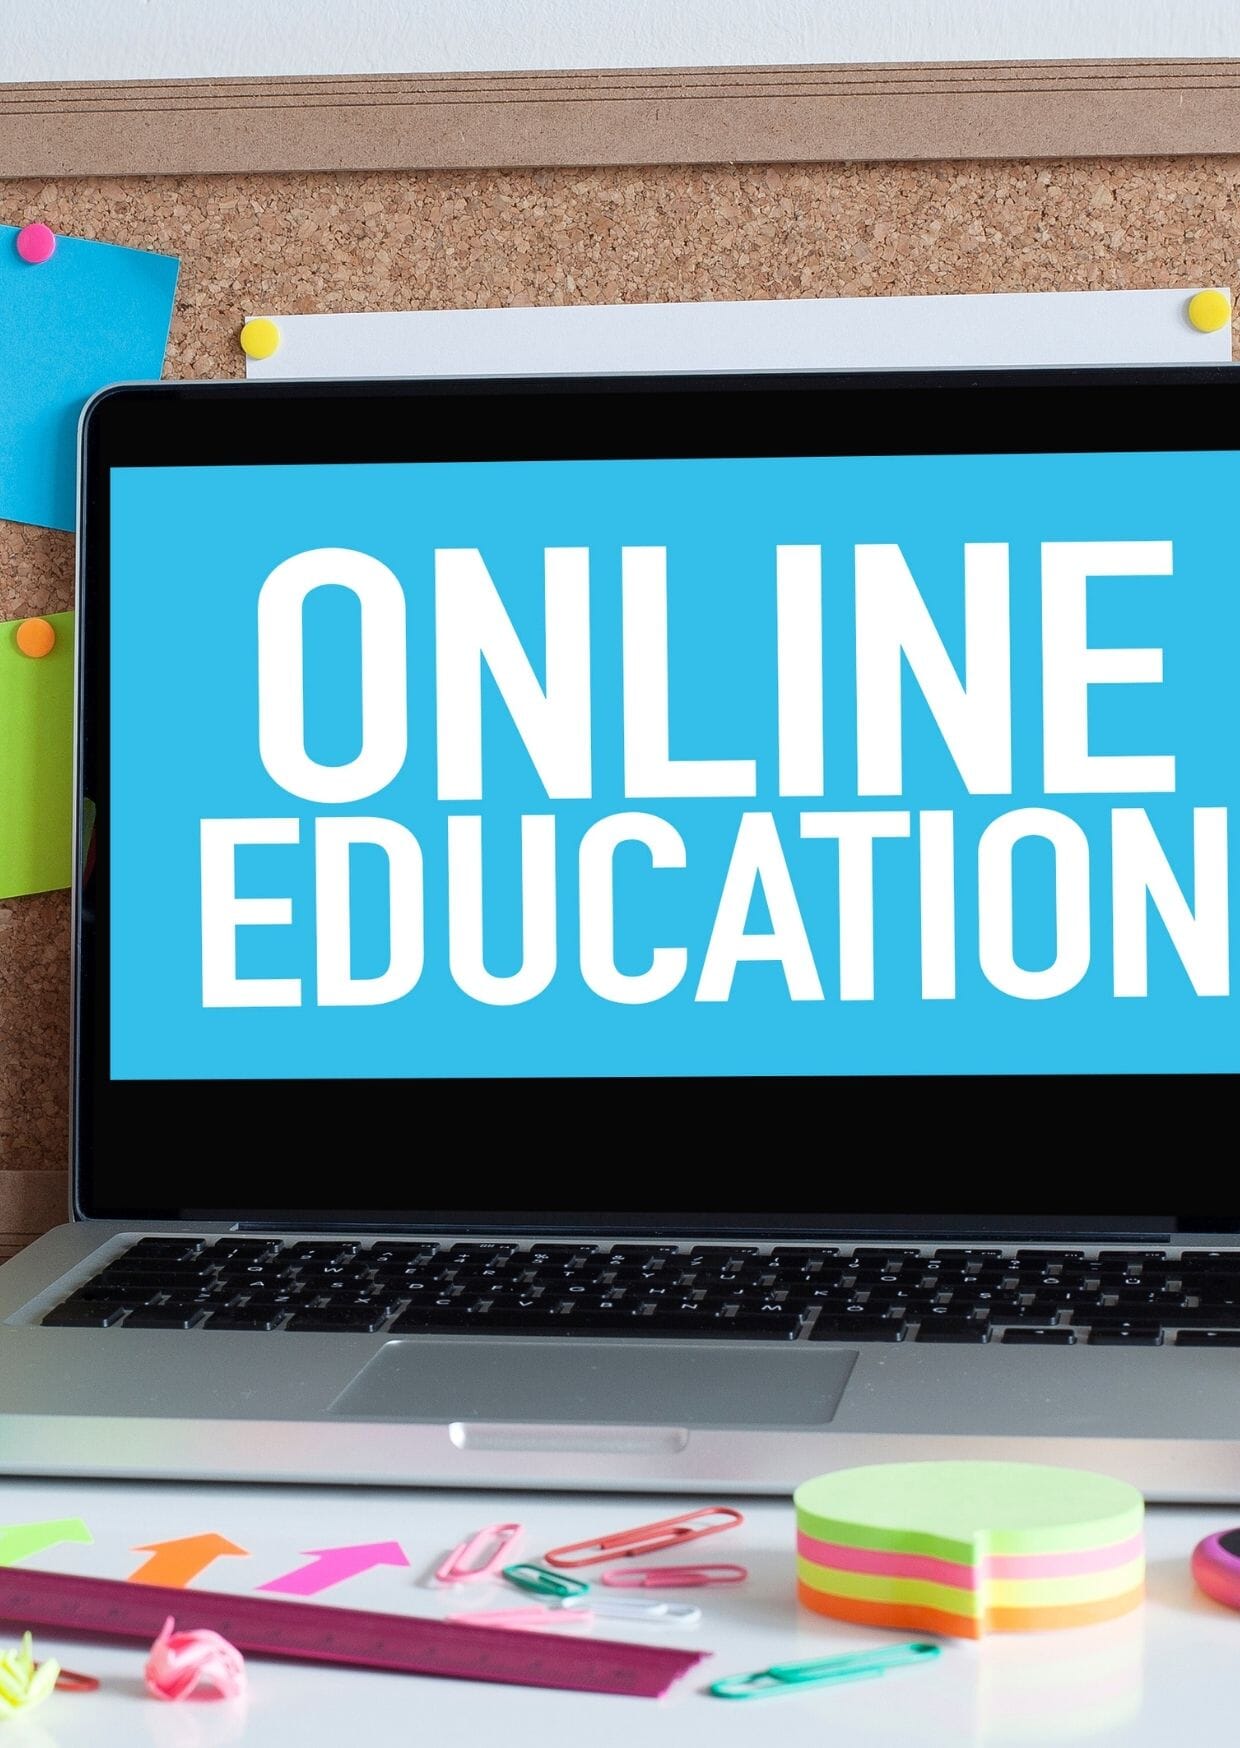 Post-Pandemic: A New World of Education – The case for online education